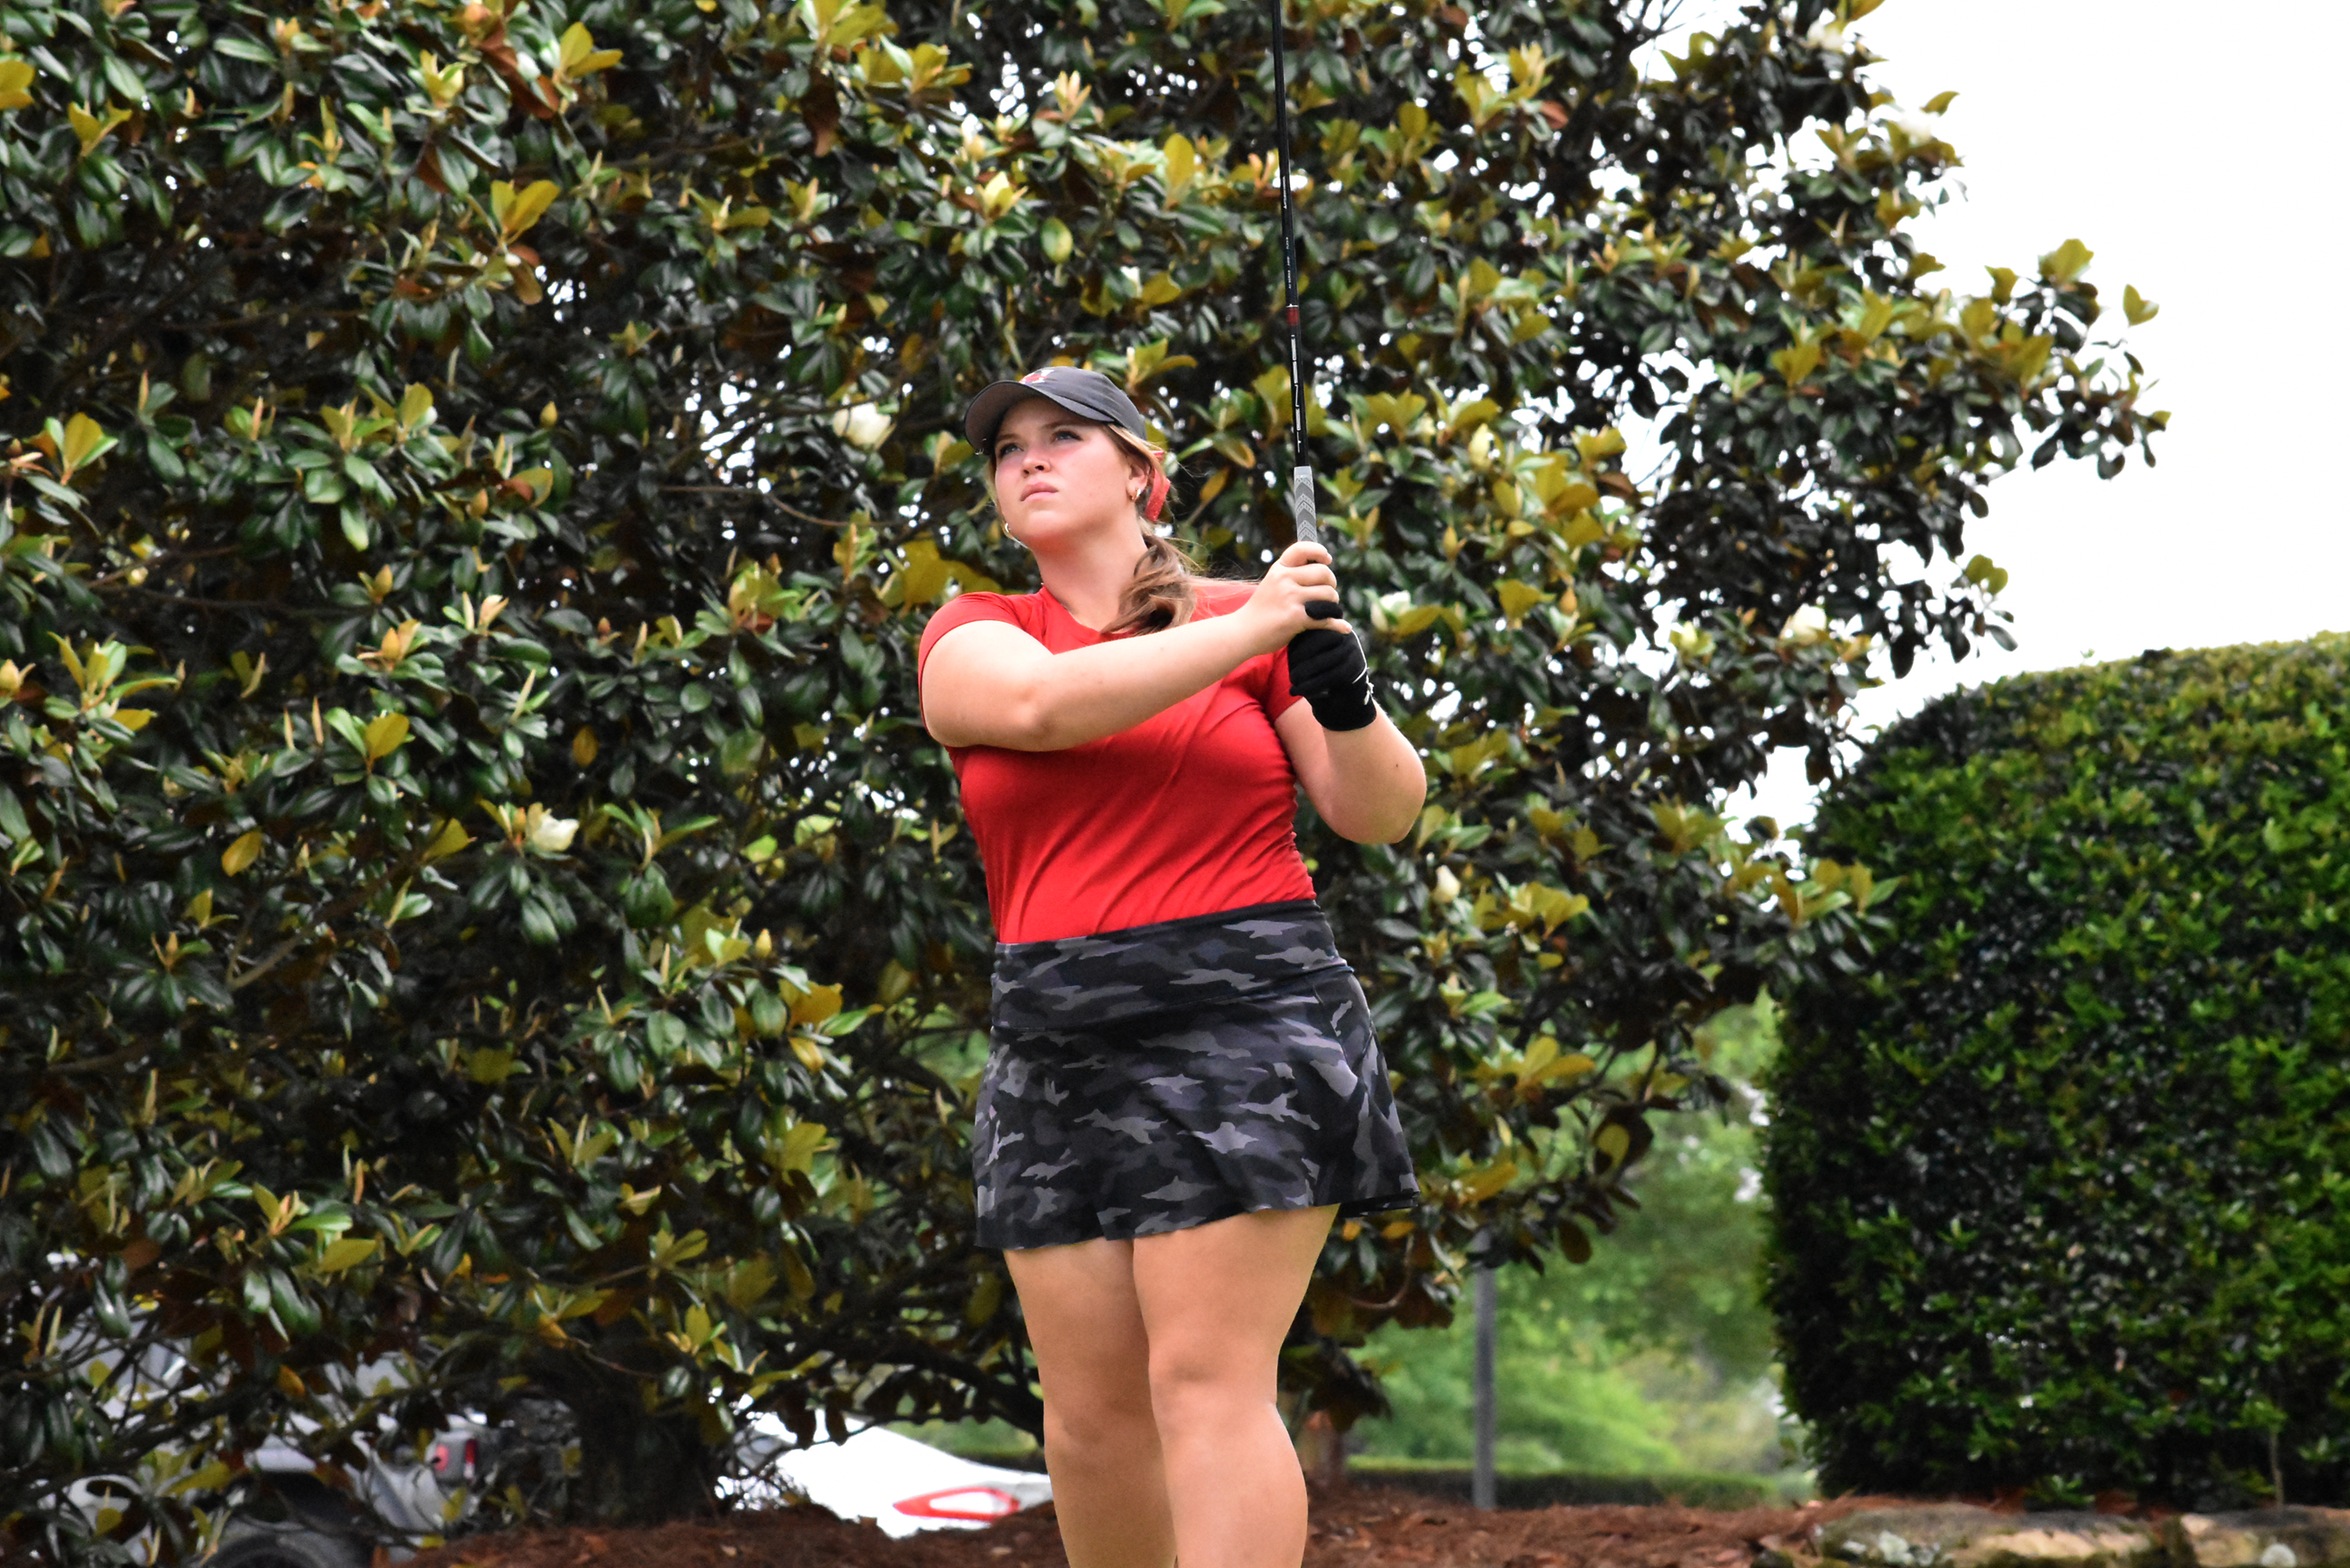 Hawks in Second after Round One of USA South Championship